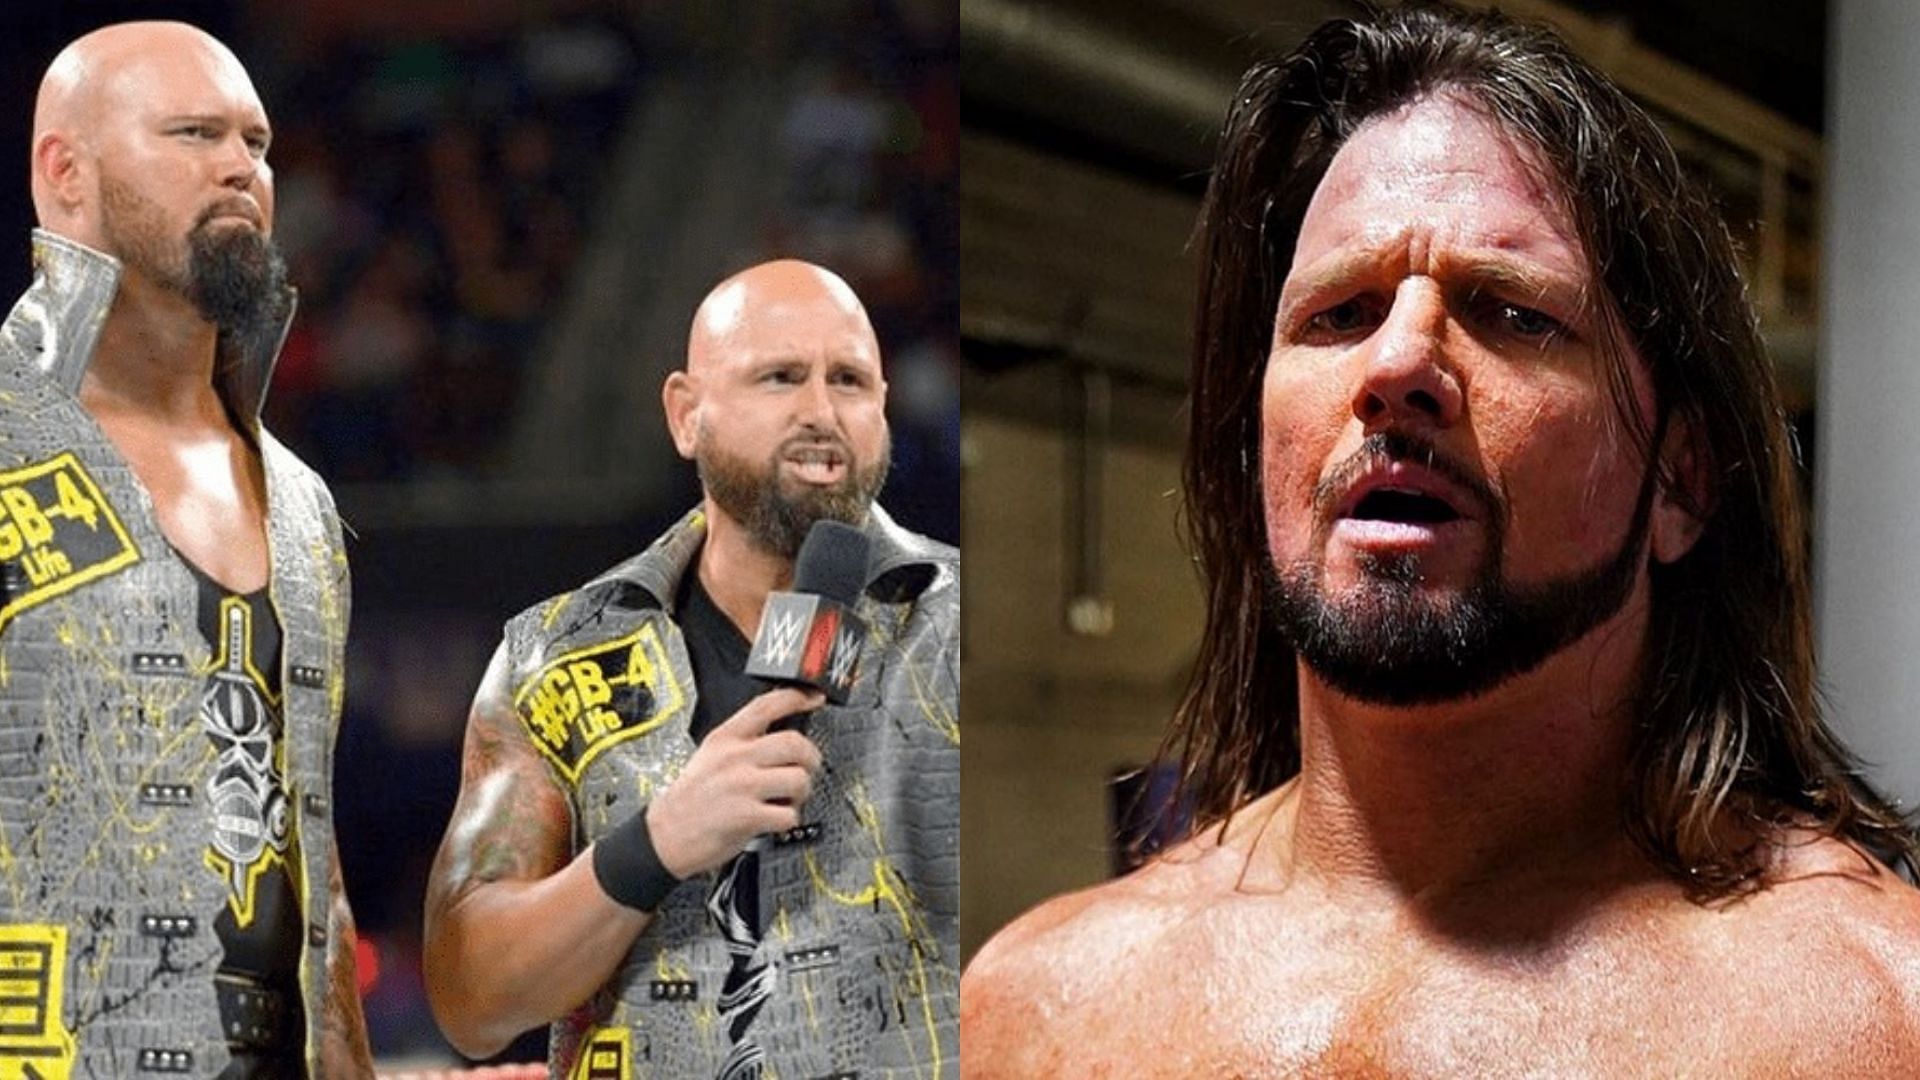 The Good Brothers (left), AJ Styles (right)